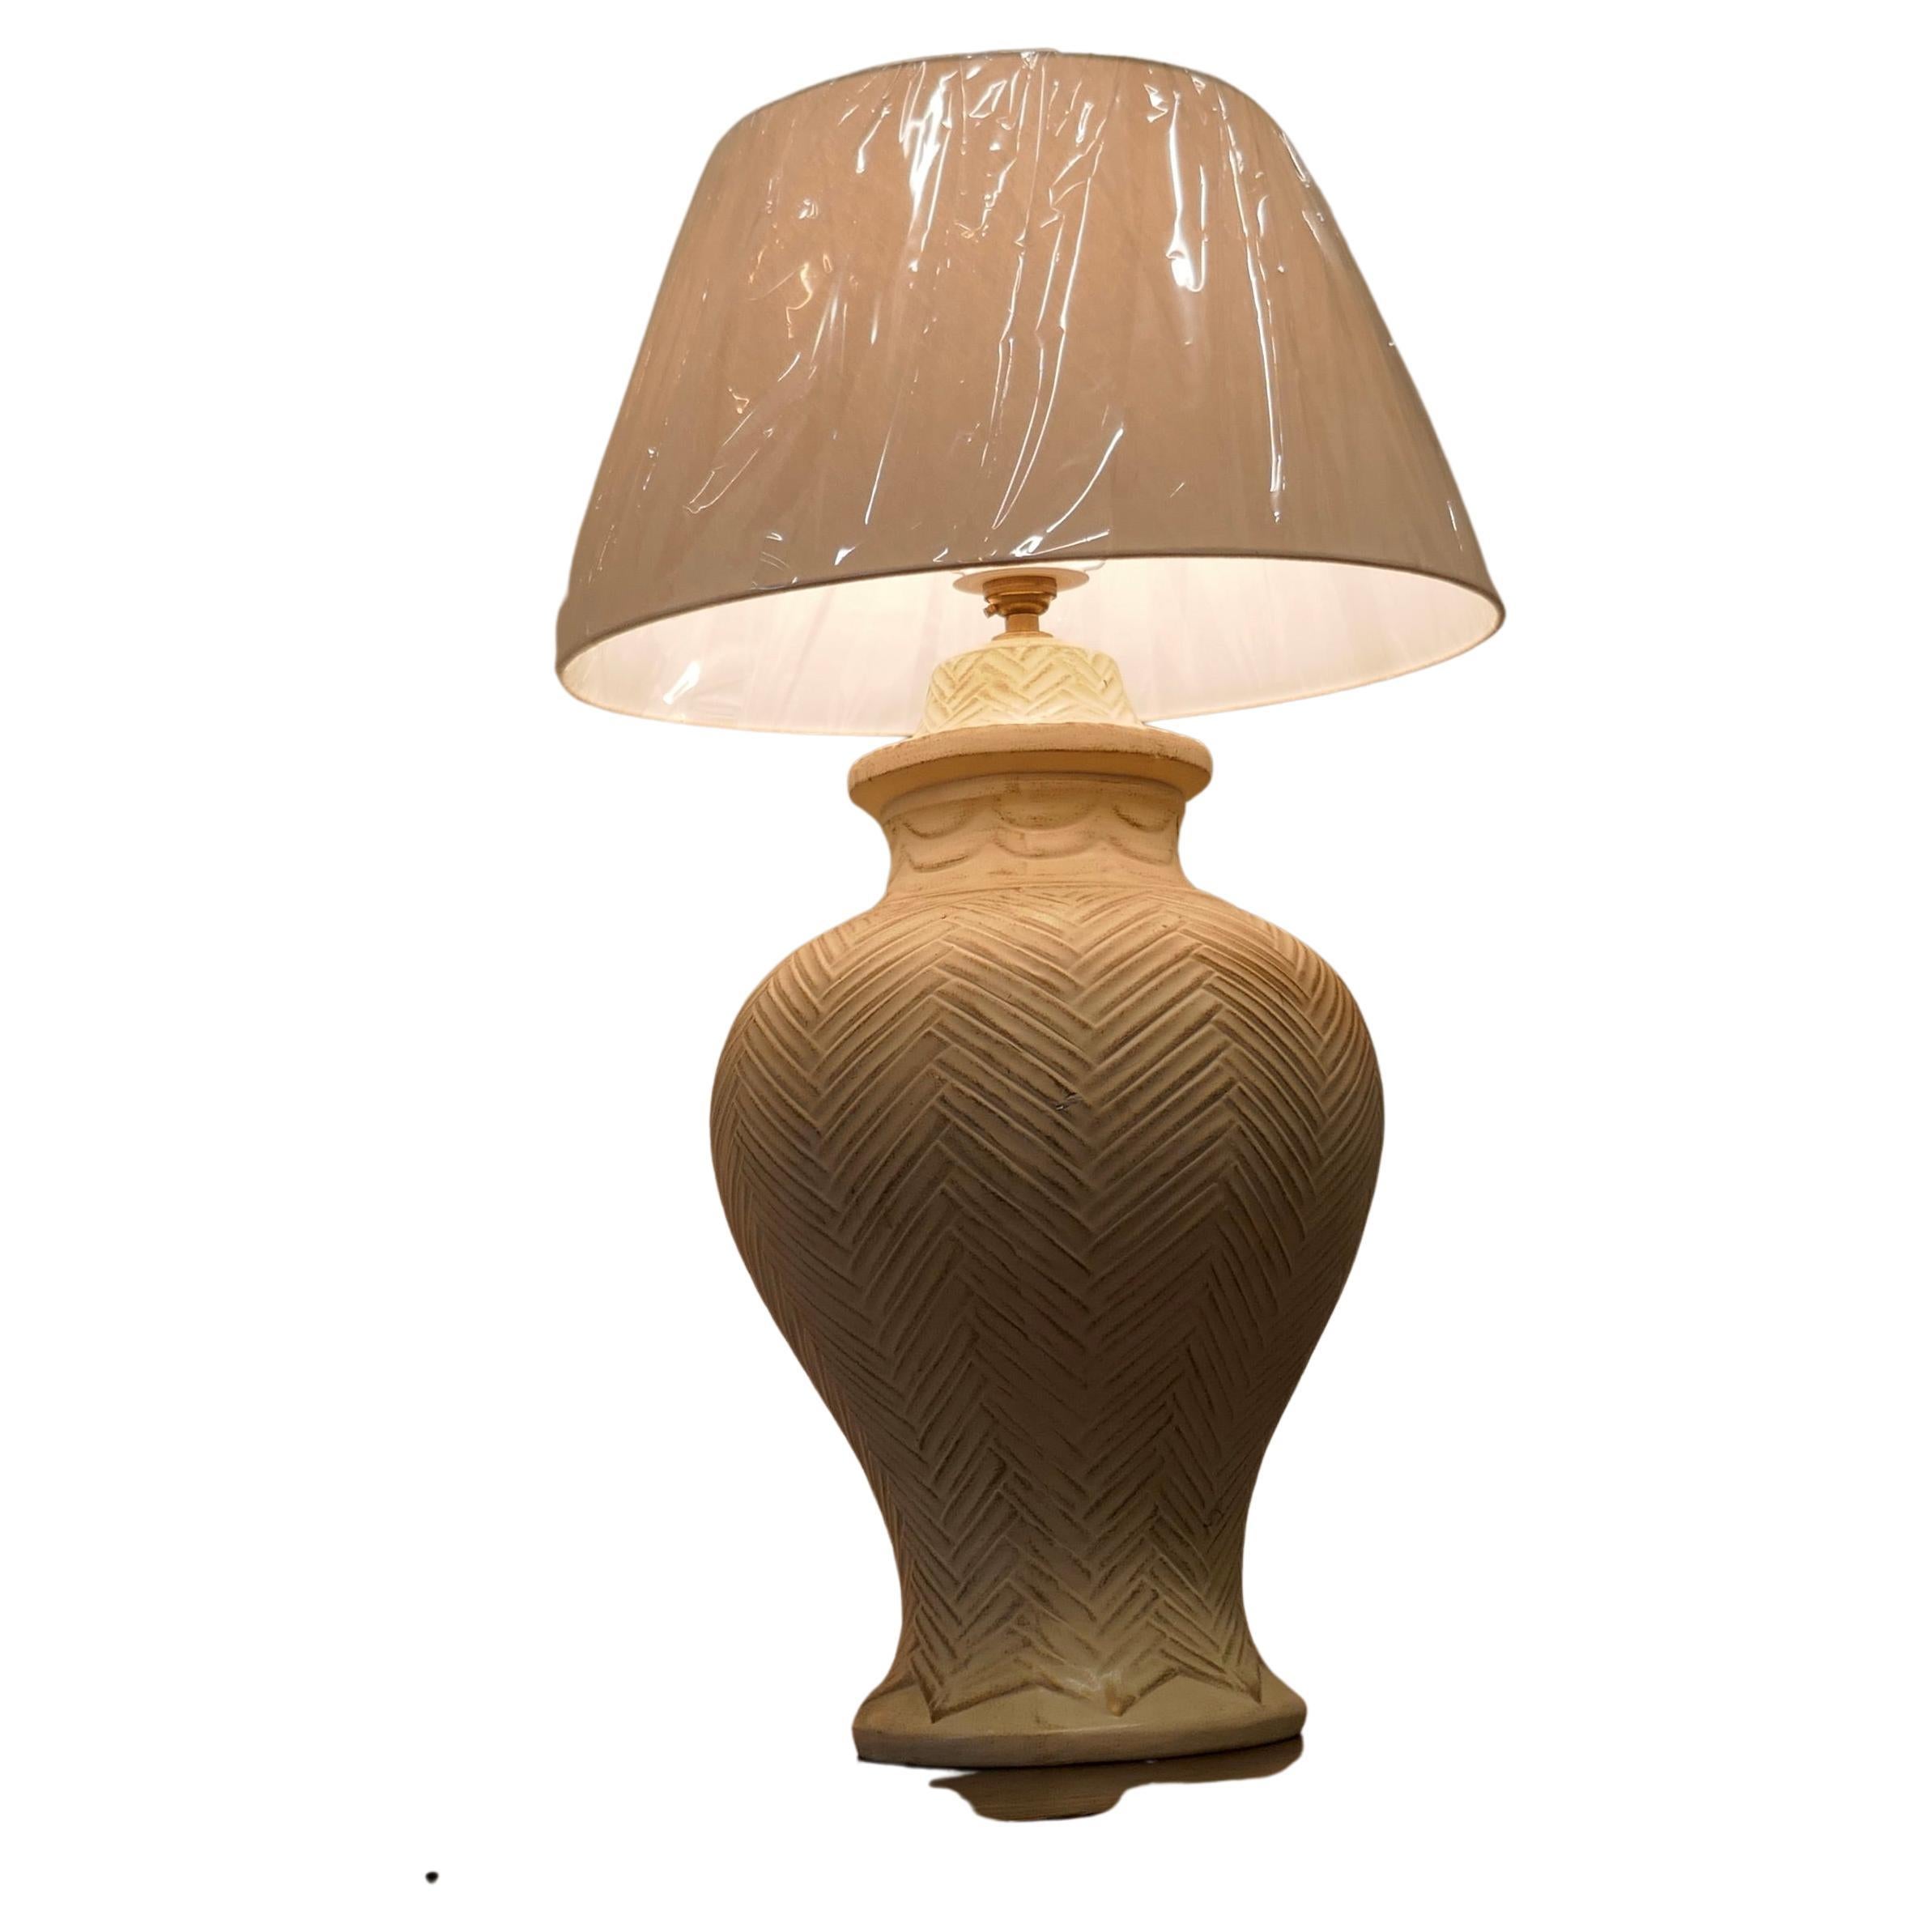 Large French Bulbous Pottery Table Lamp